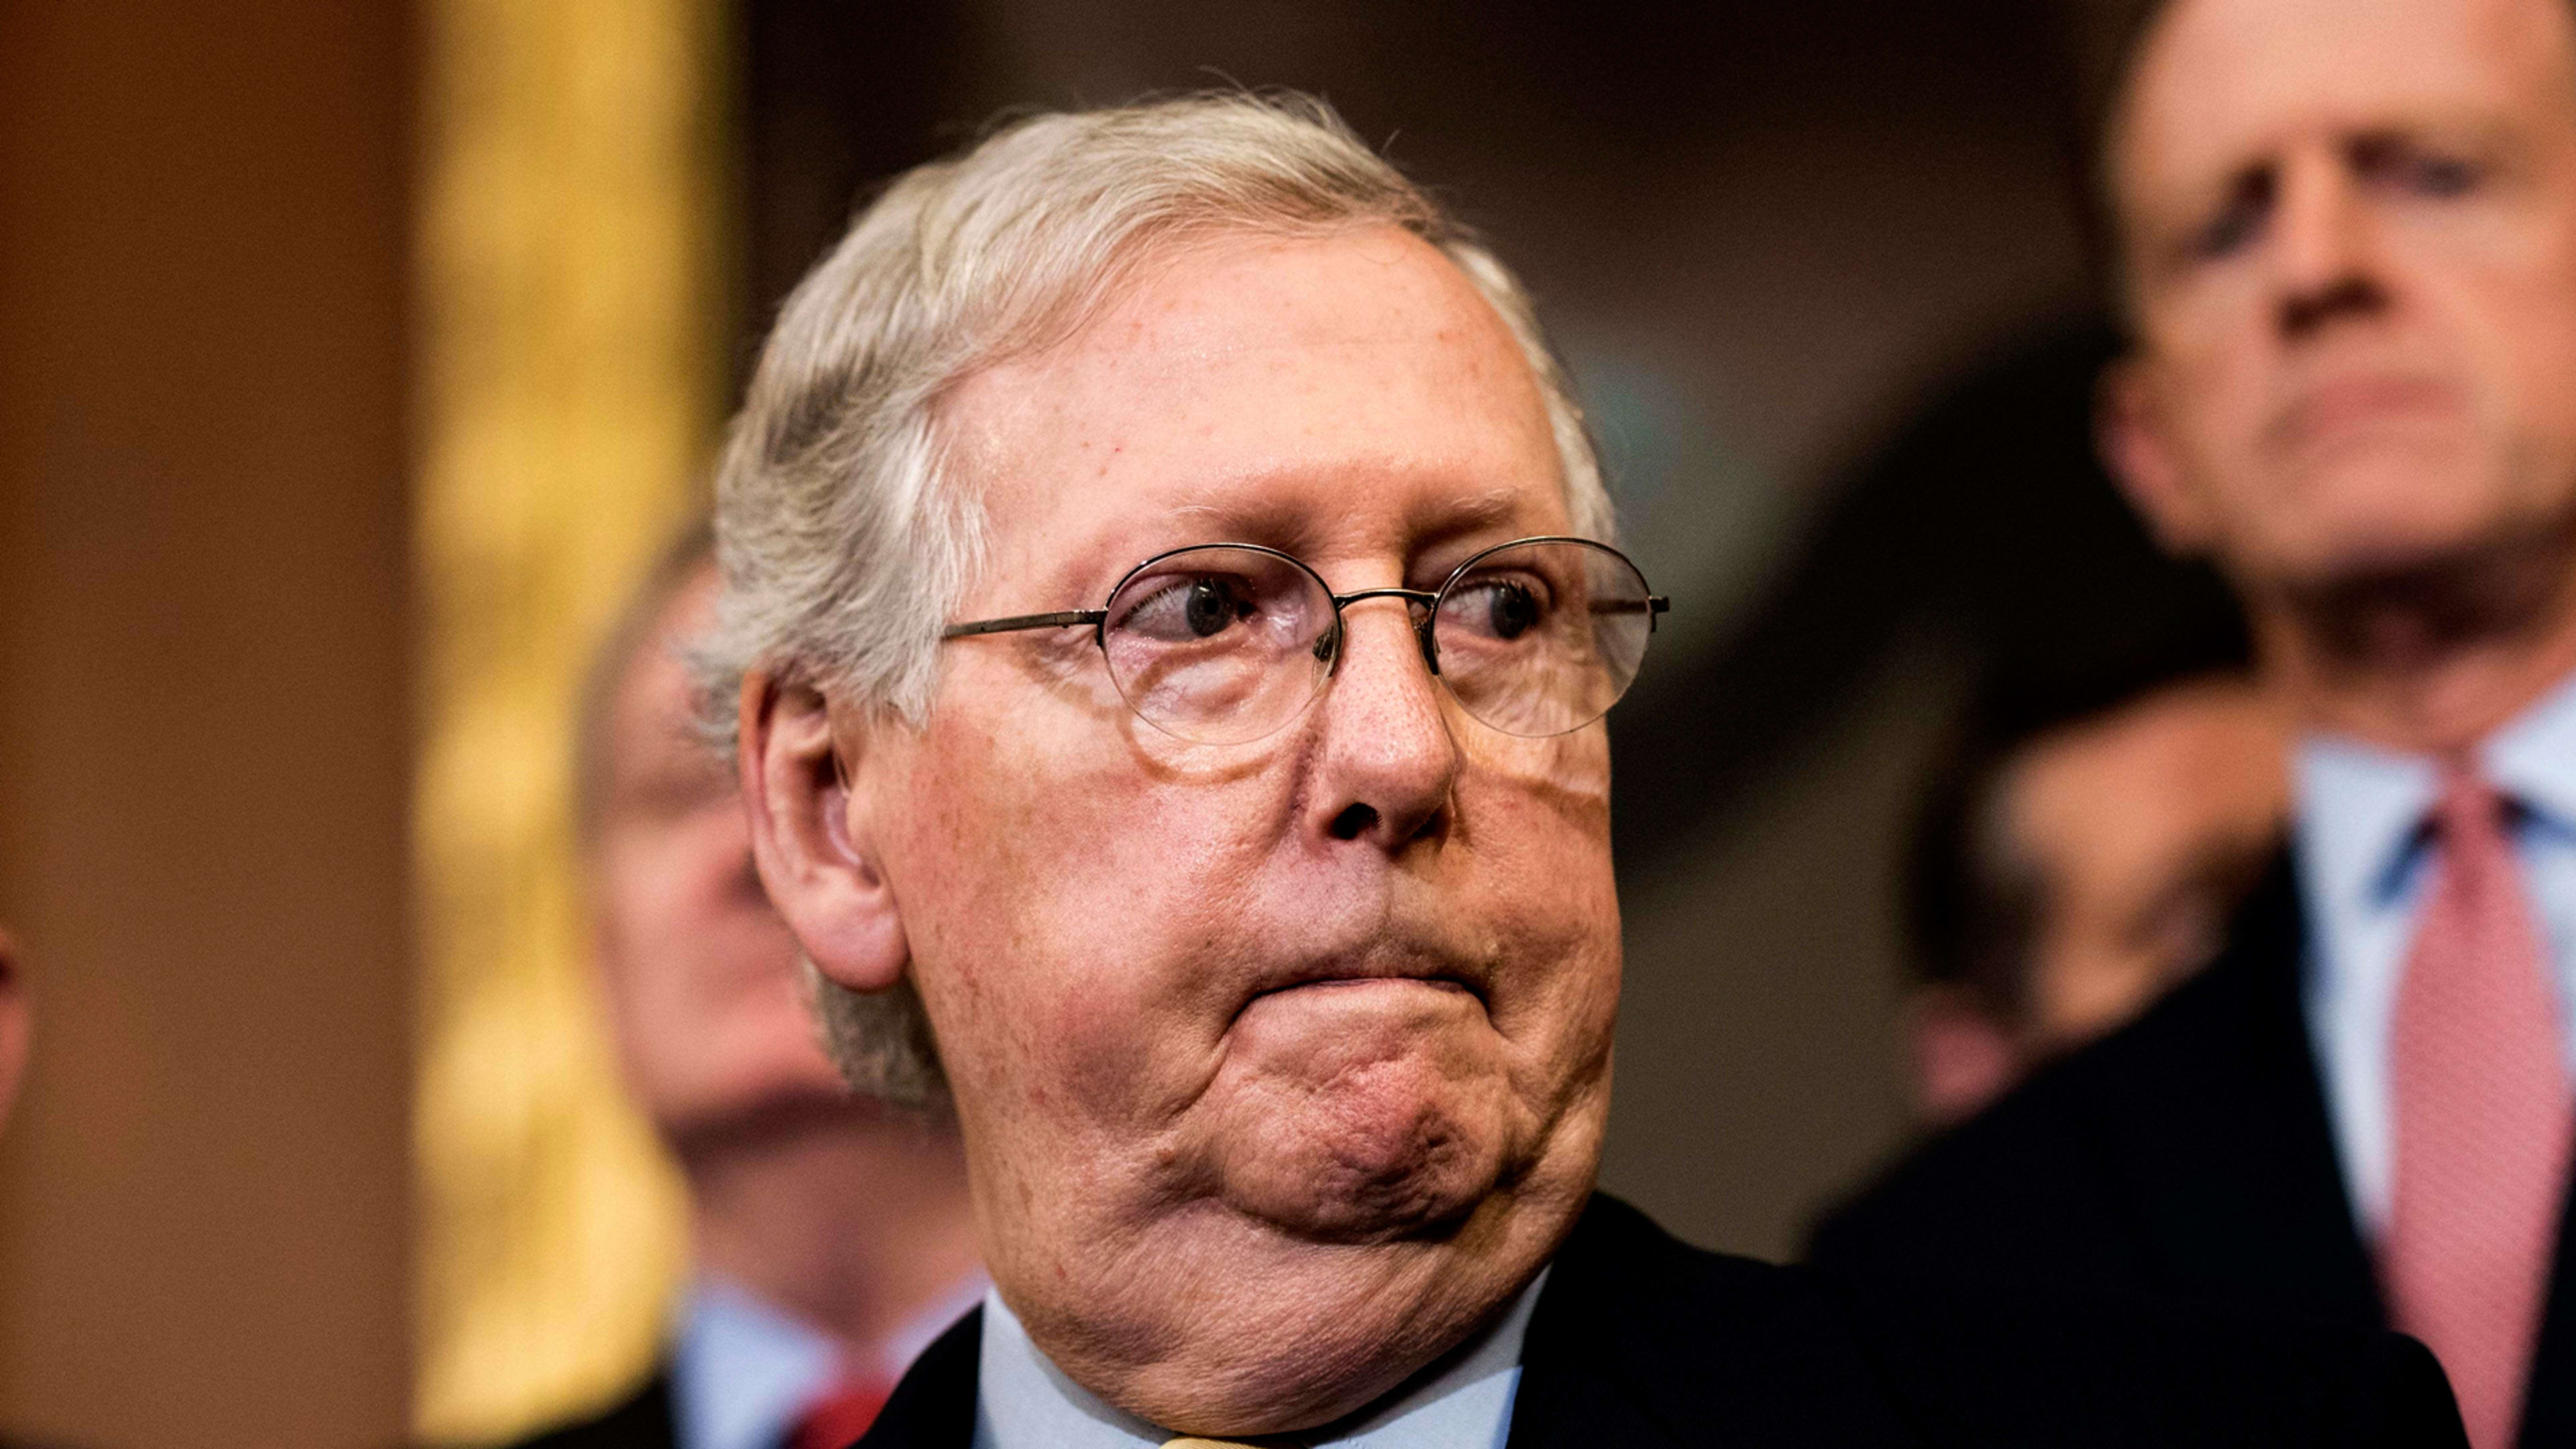 Even Mitch McConnell thinks Roy Moore should drop out of the Senate race now